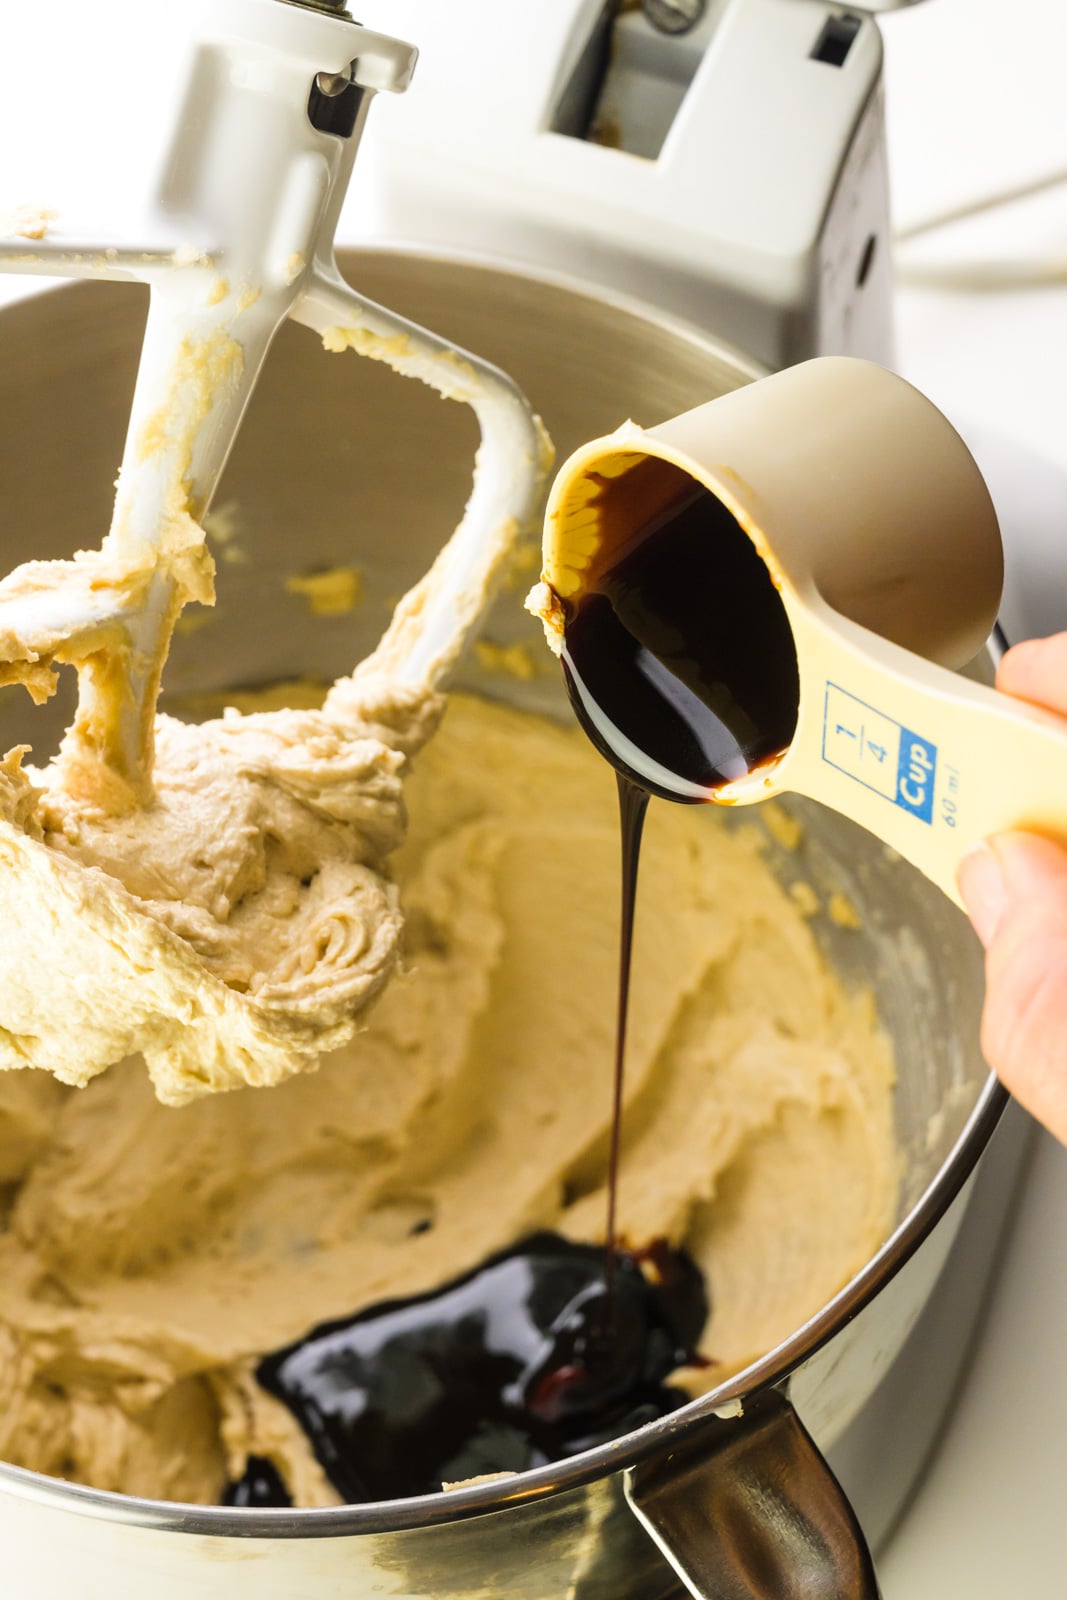 A hand holds a measuring cup pouring molasses into a mixing bowl with cookie batter.